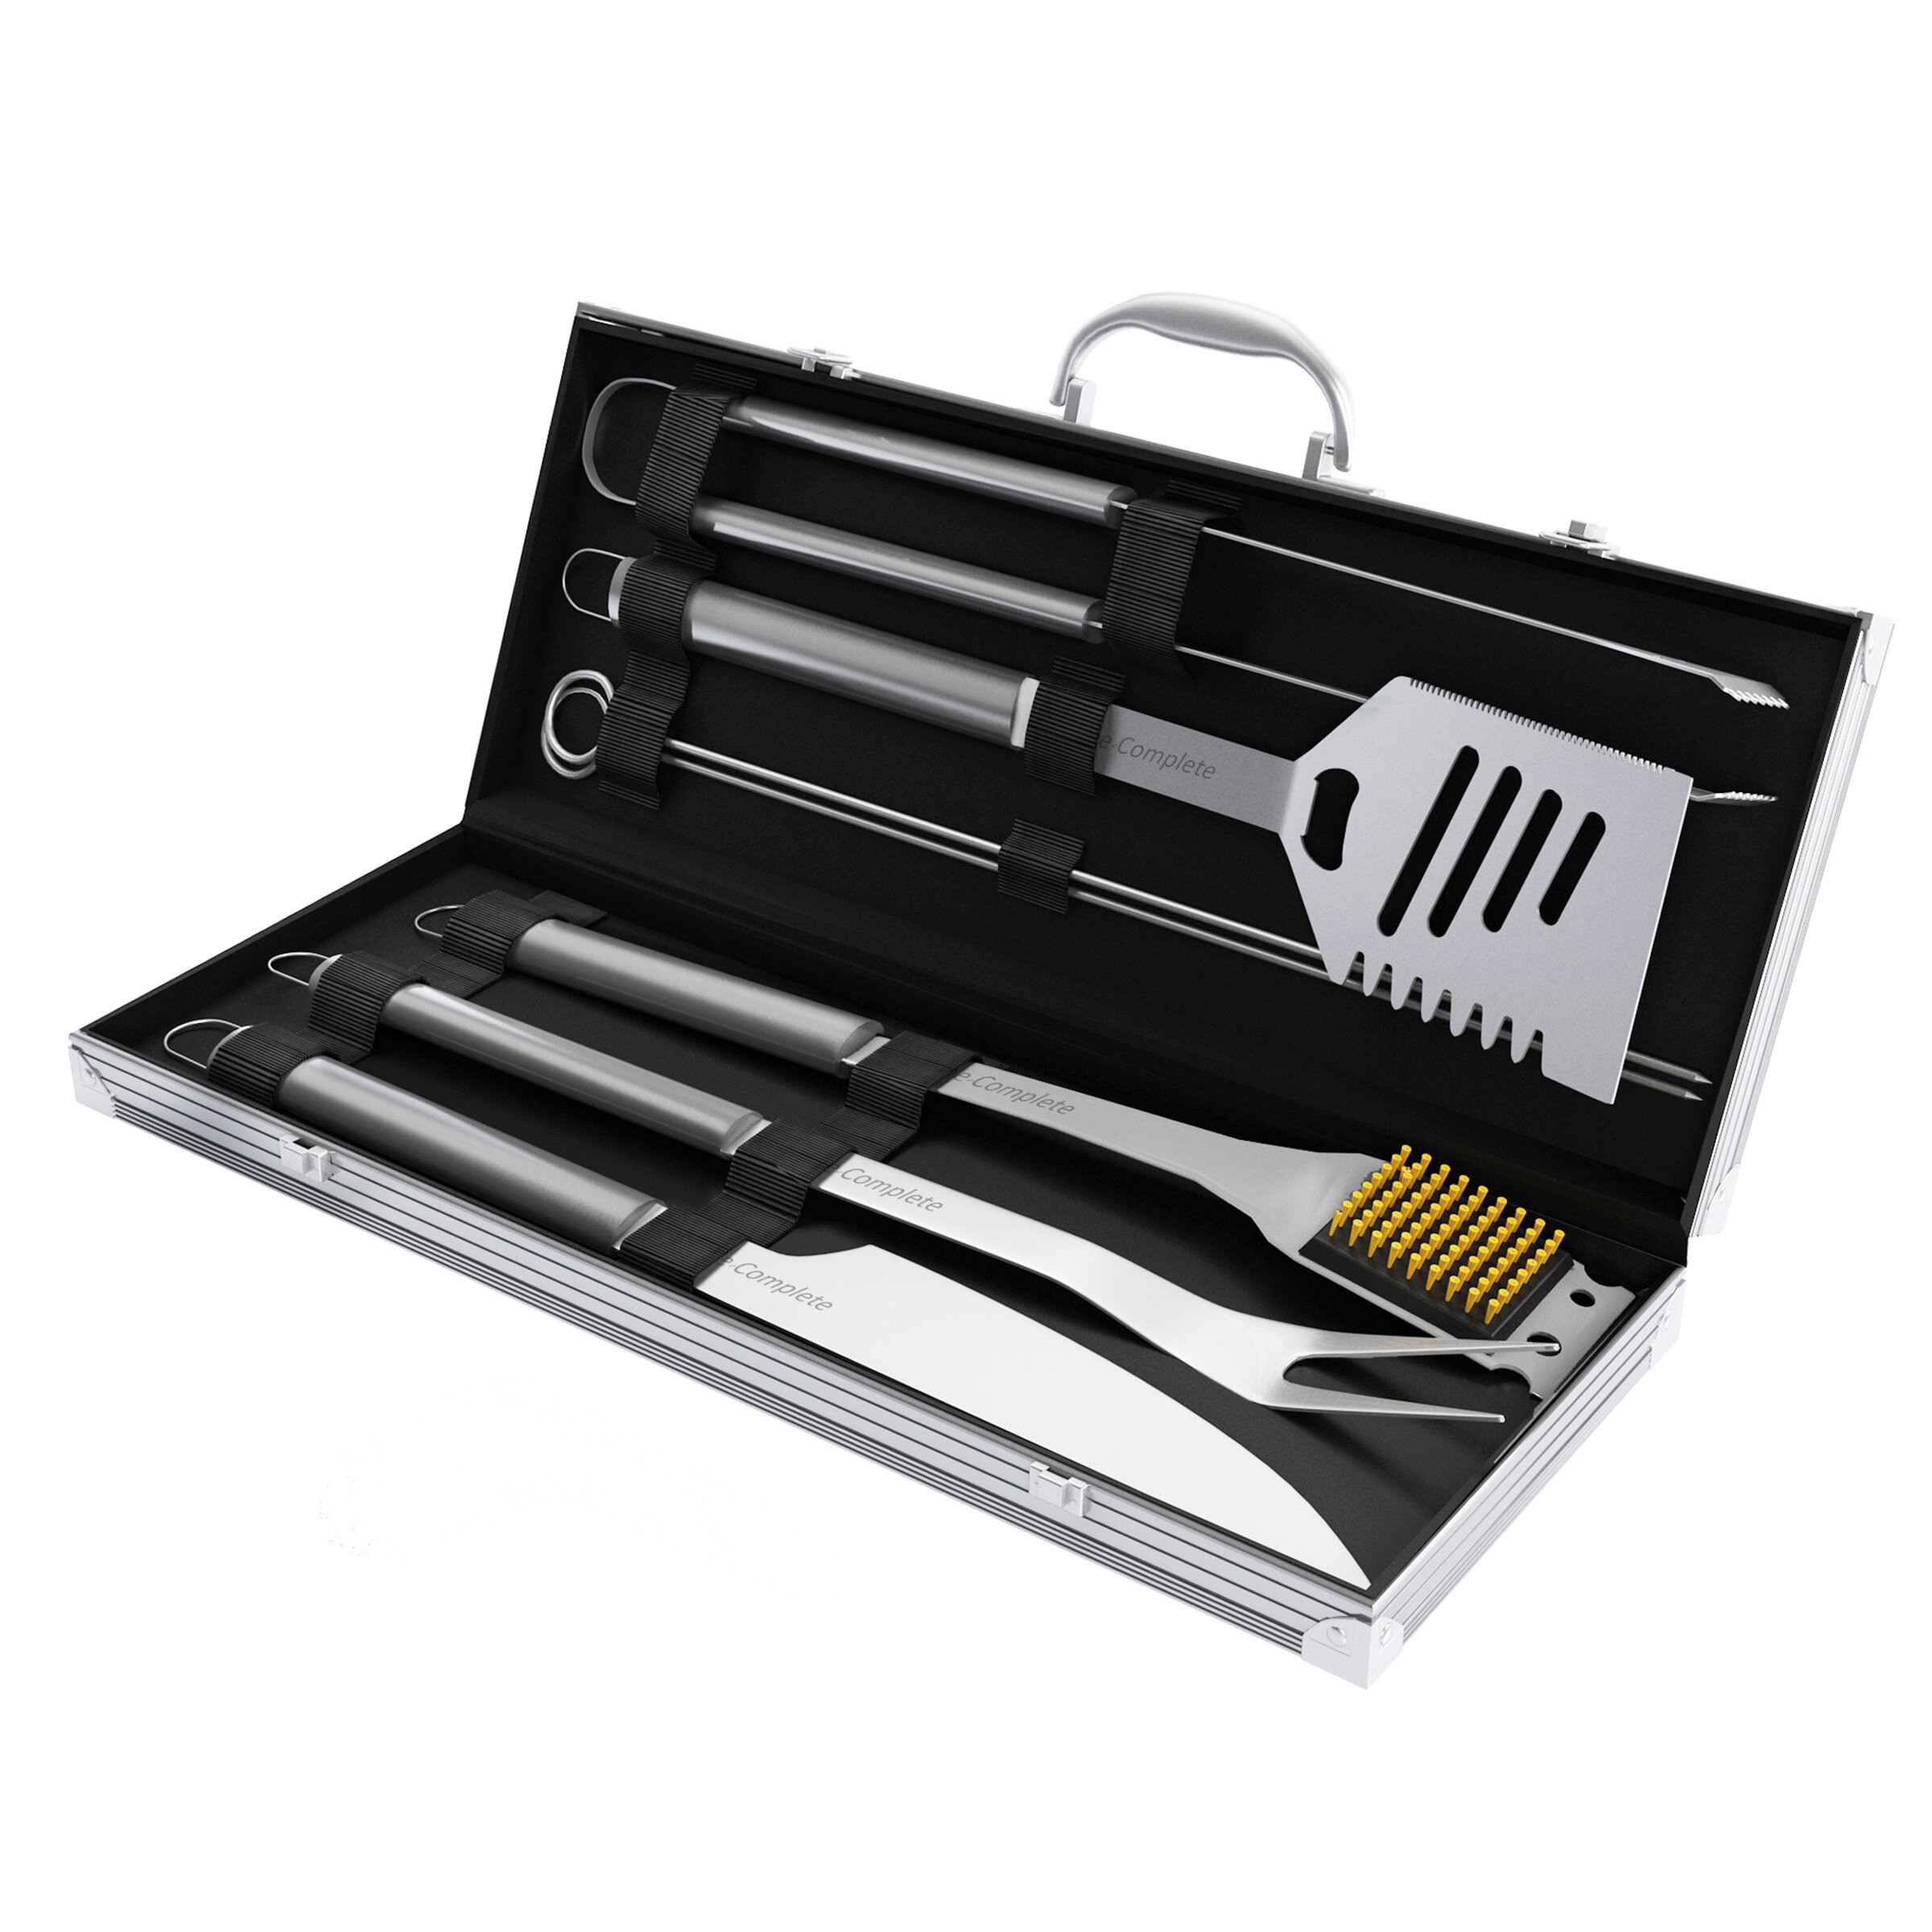 122 Piece BBQ Set Tools Gift, Outdoor Stainless Steel BBQ Tool Set, Outdoor Cooking Accessories